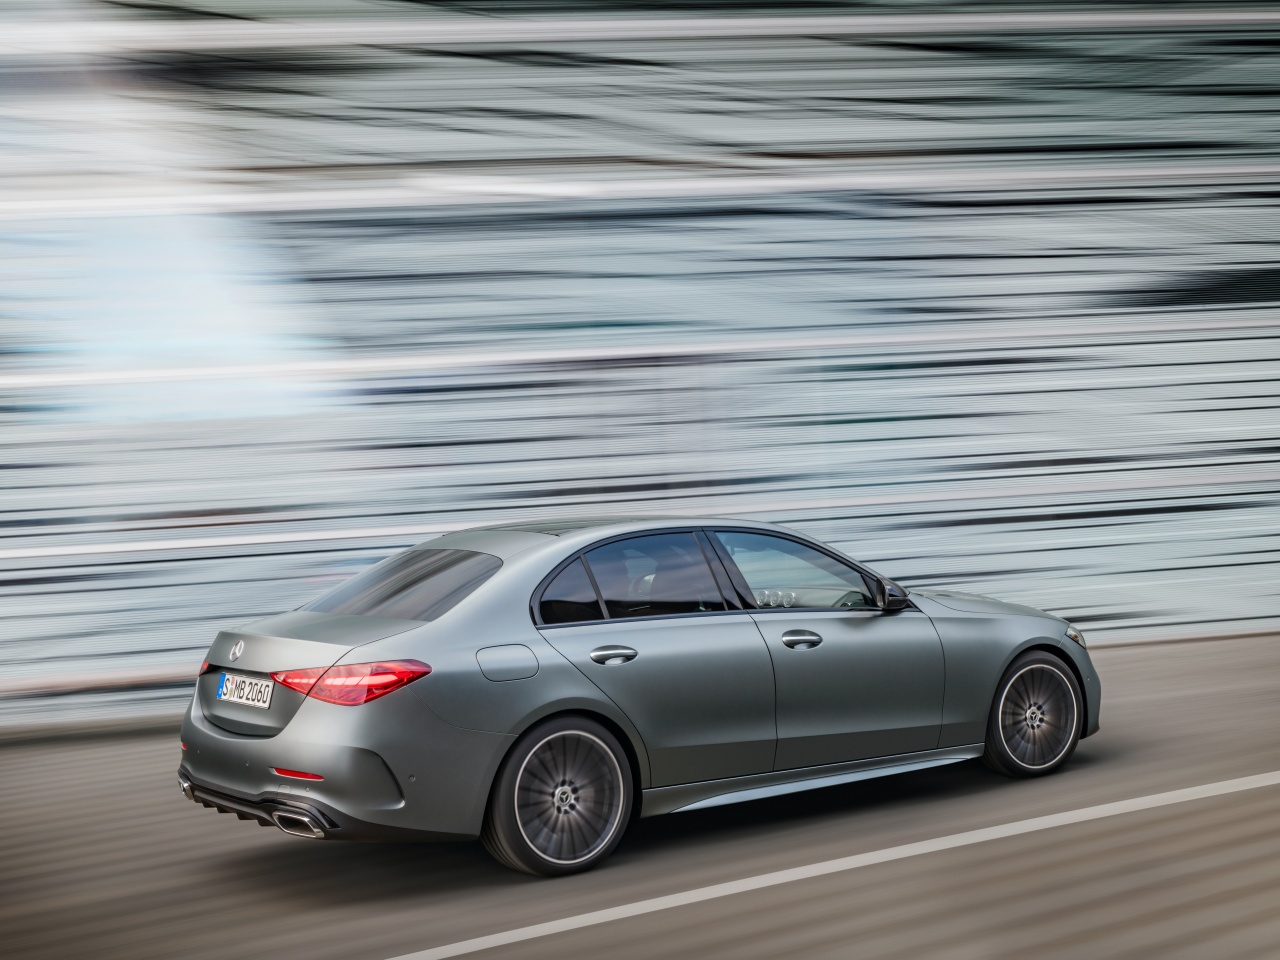 Mercedes Clase C lateral trasera